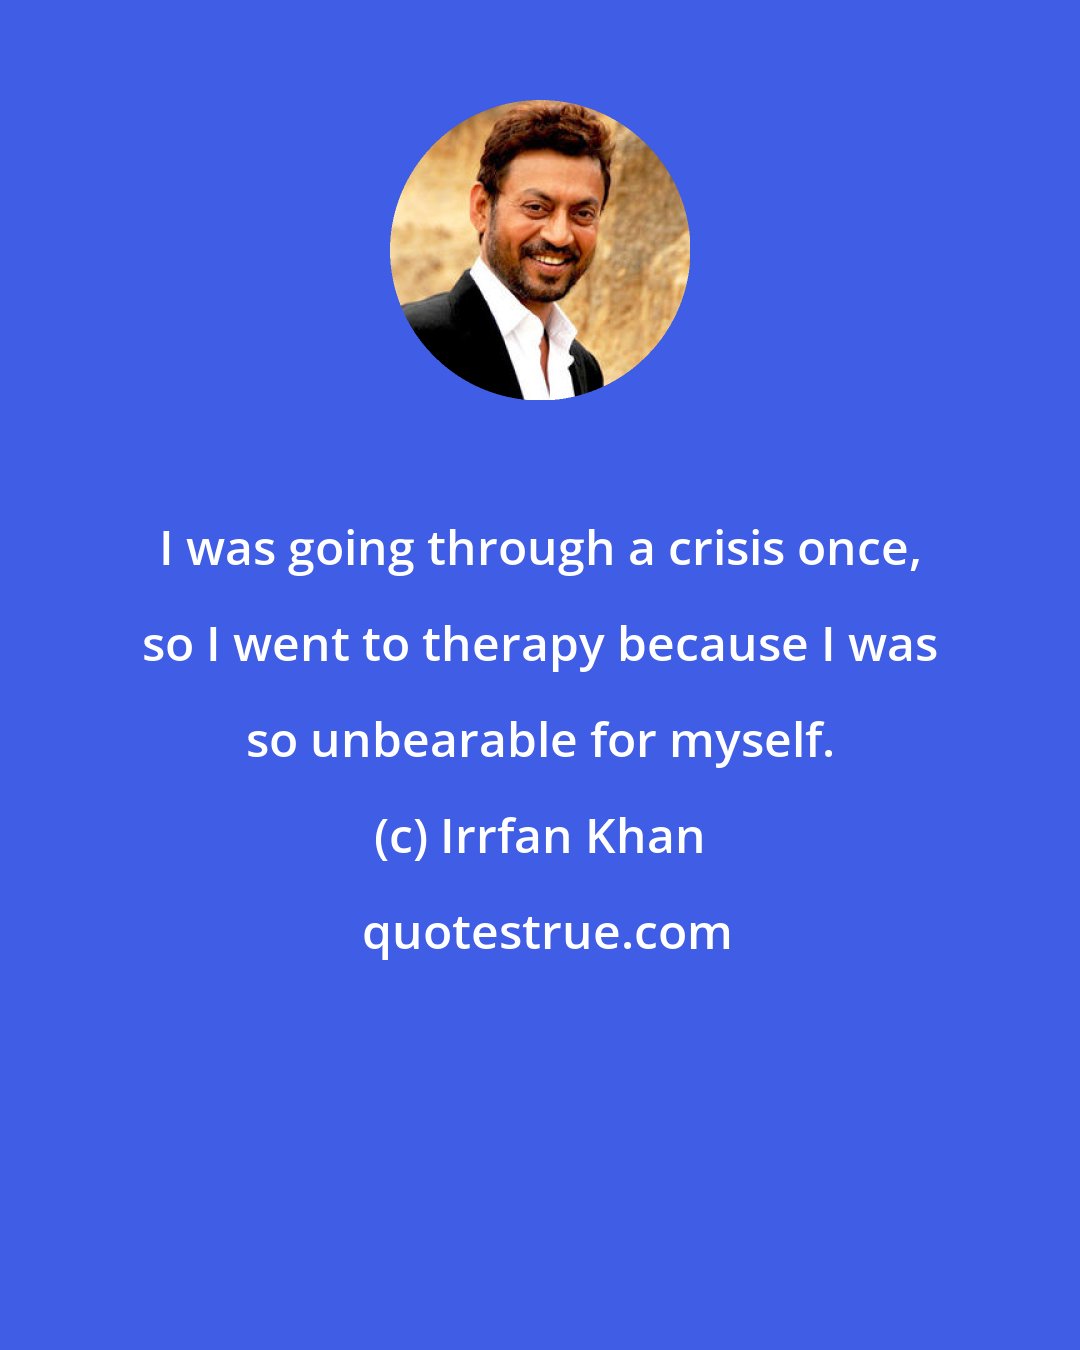 Irrfan Khan: I was going through a crisis once, so I went to therapy because I was so unbearable for myself.